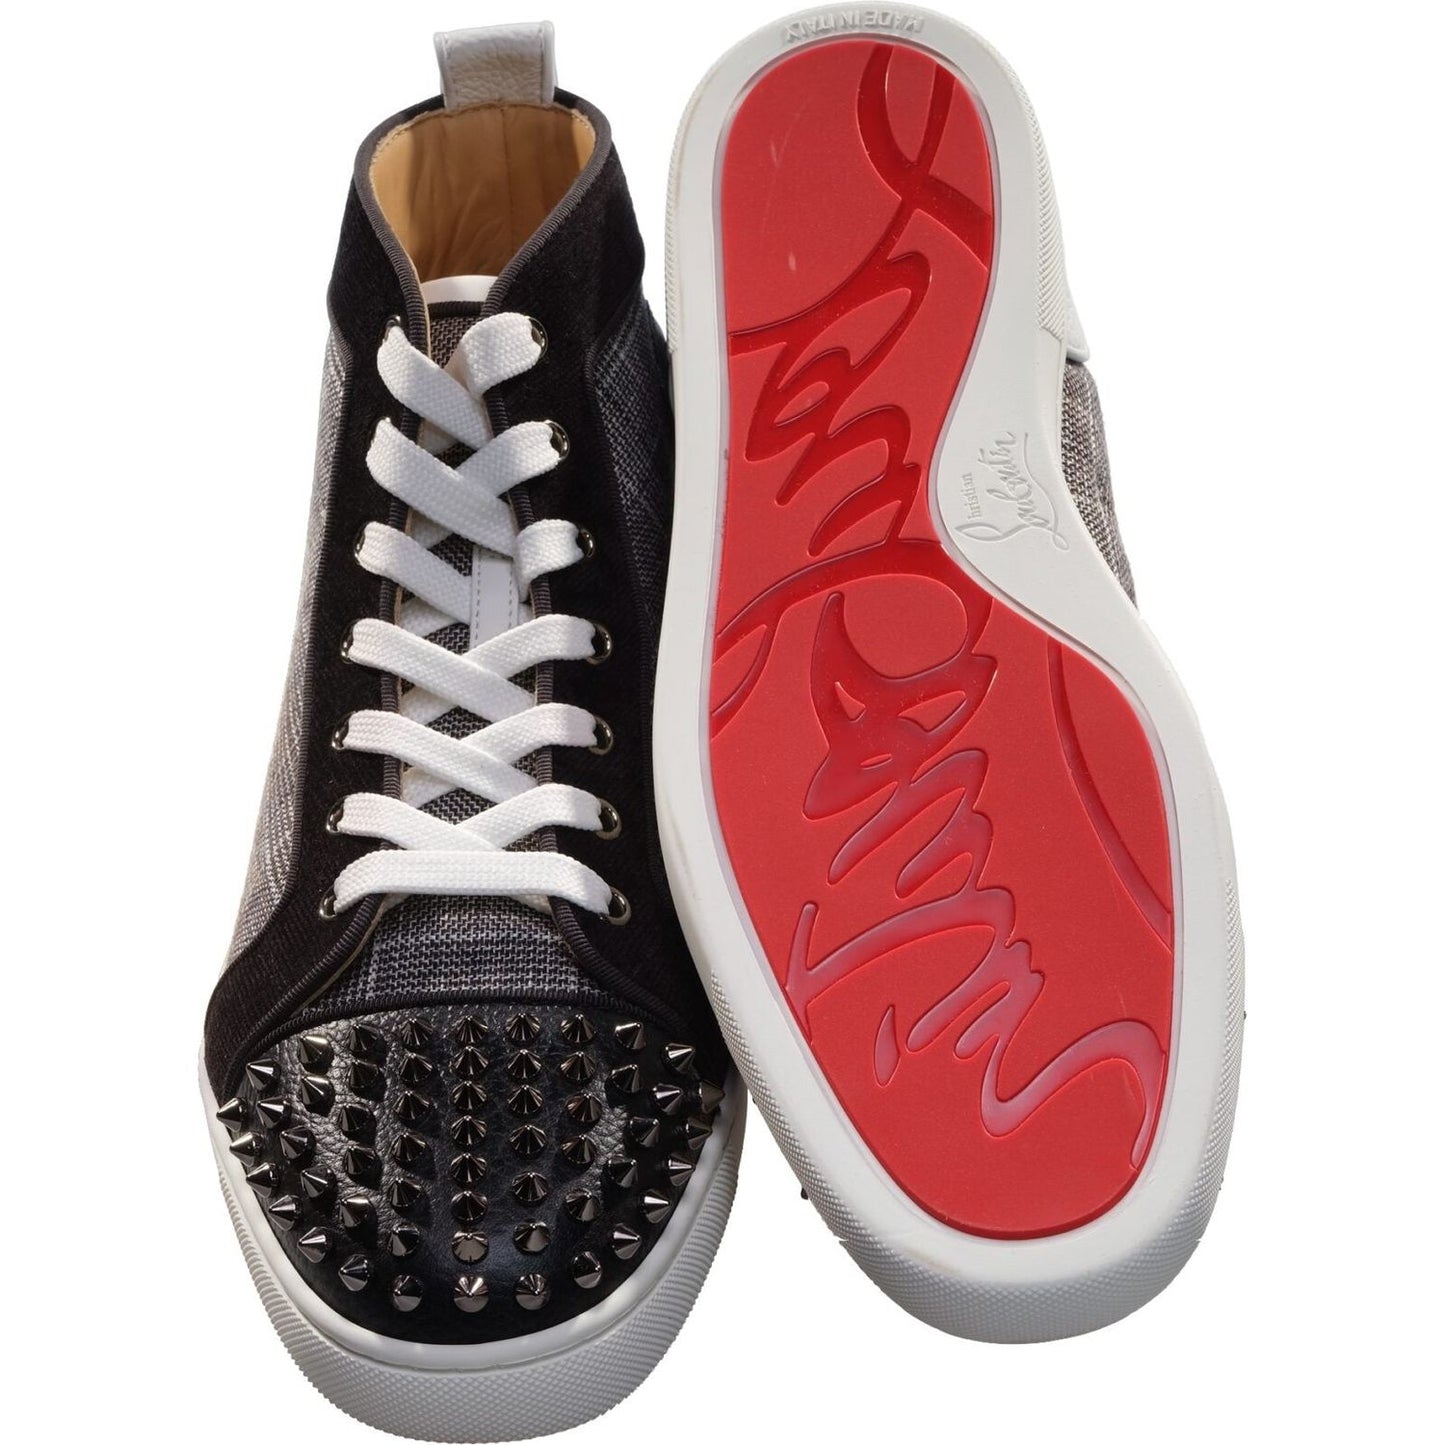 Lou Spikes Orlato Flat Contrast and Studded High Top Sneakers